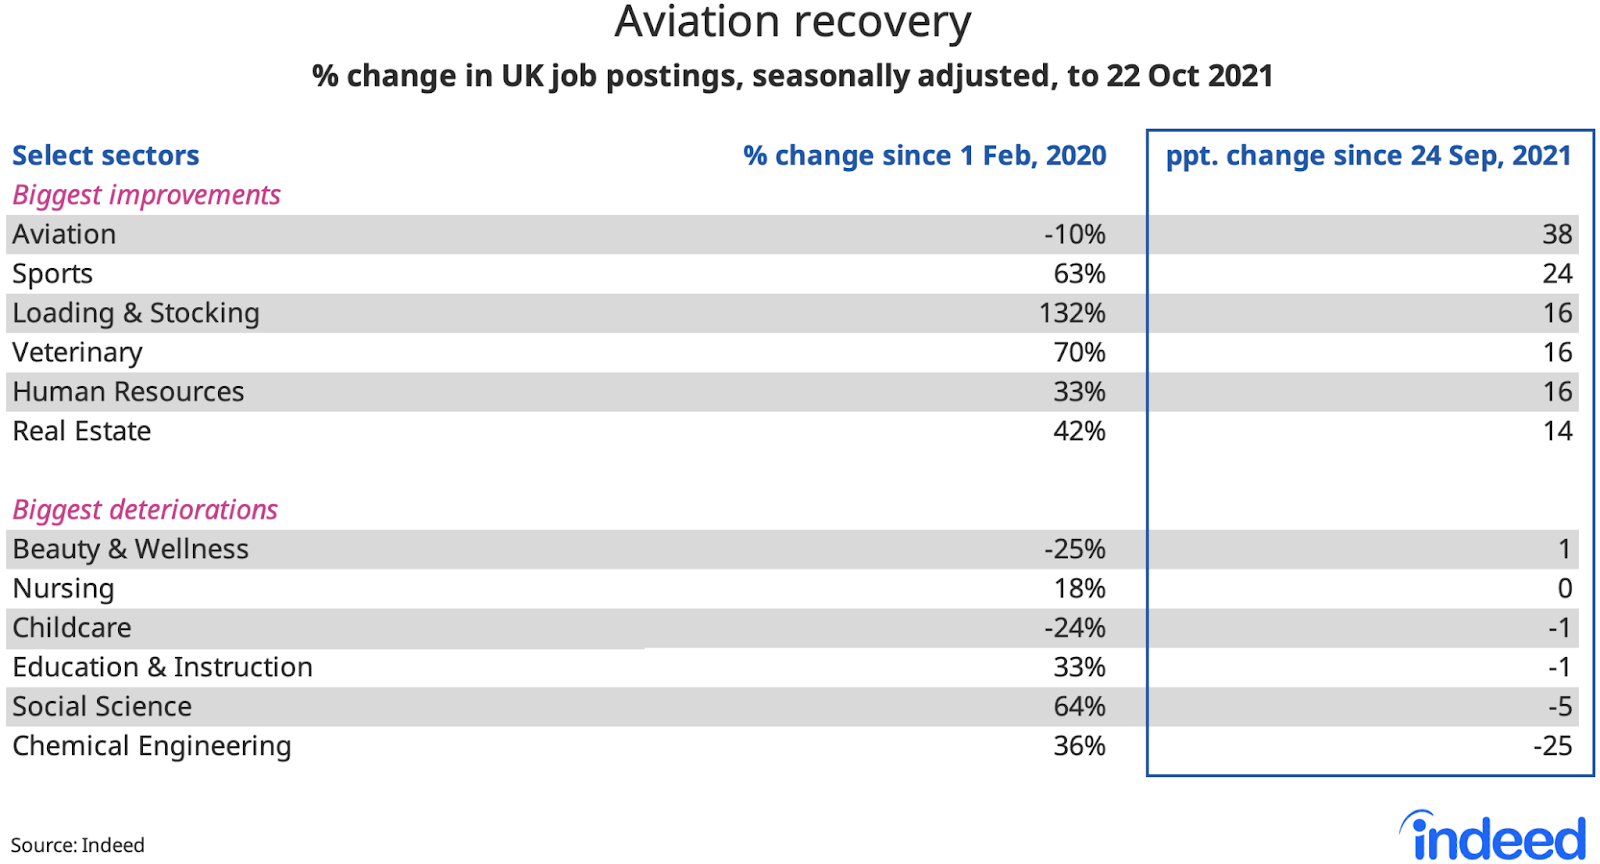 Table titled “Aviation recovery.”